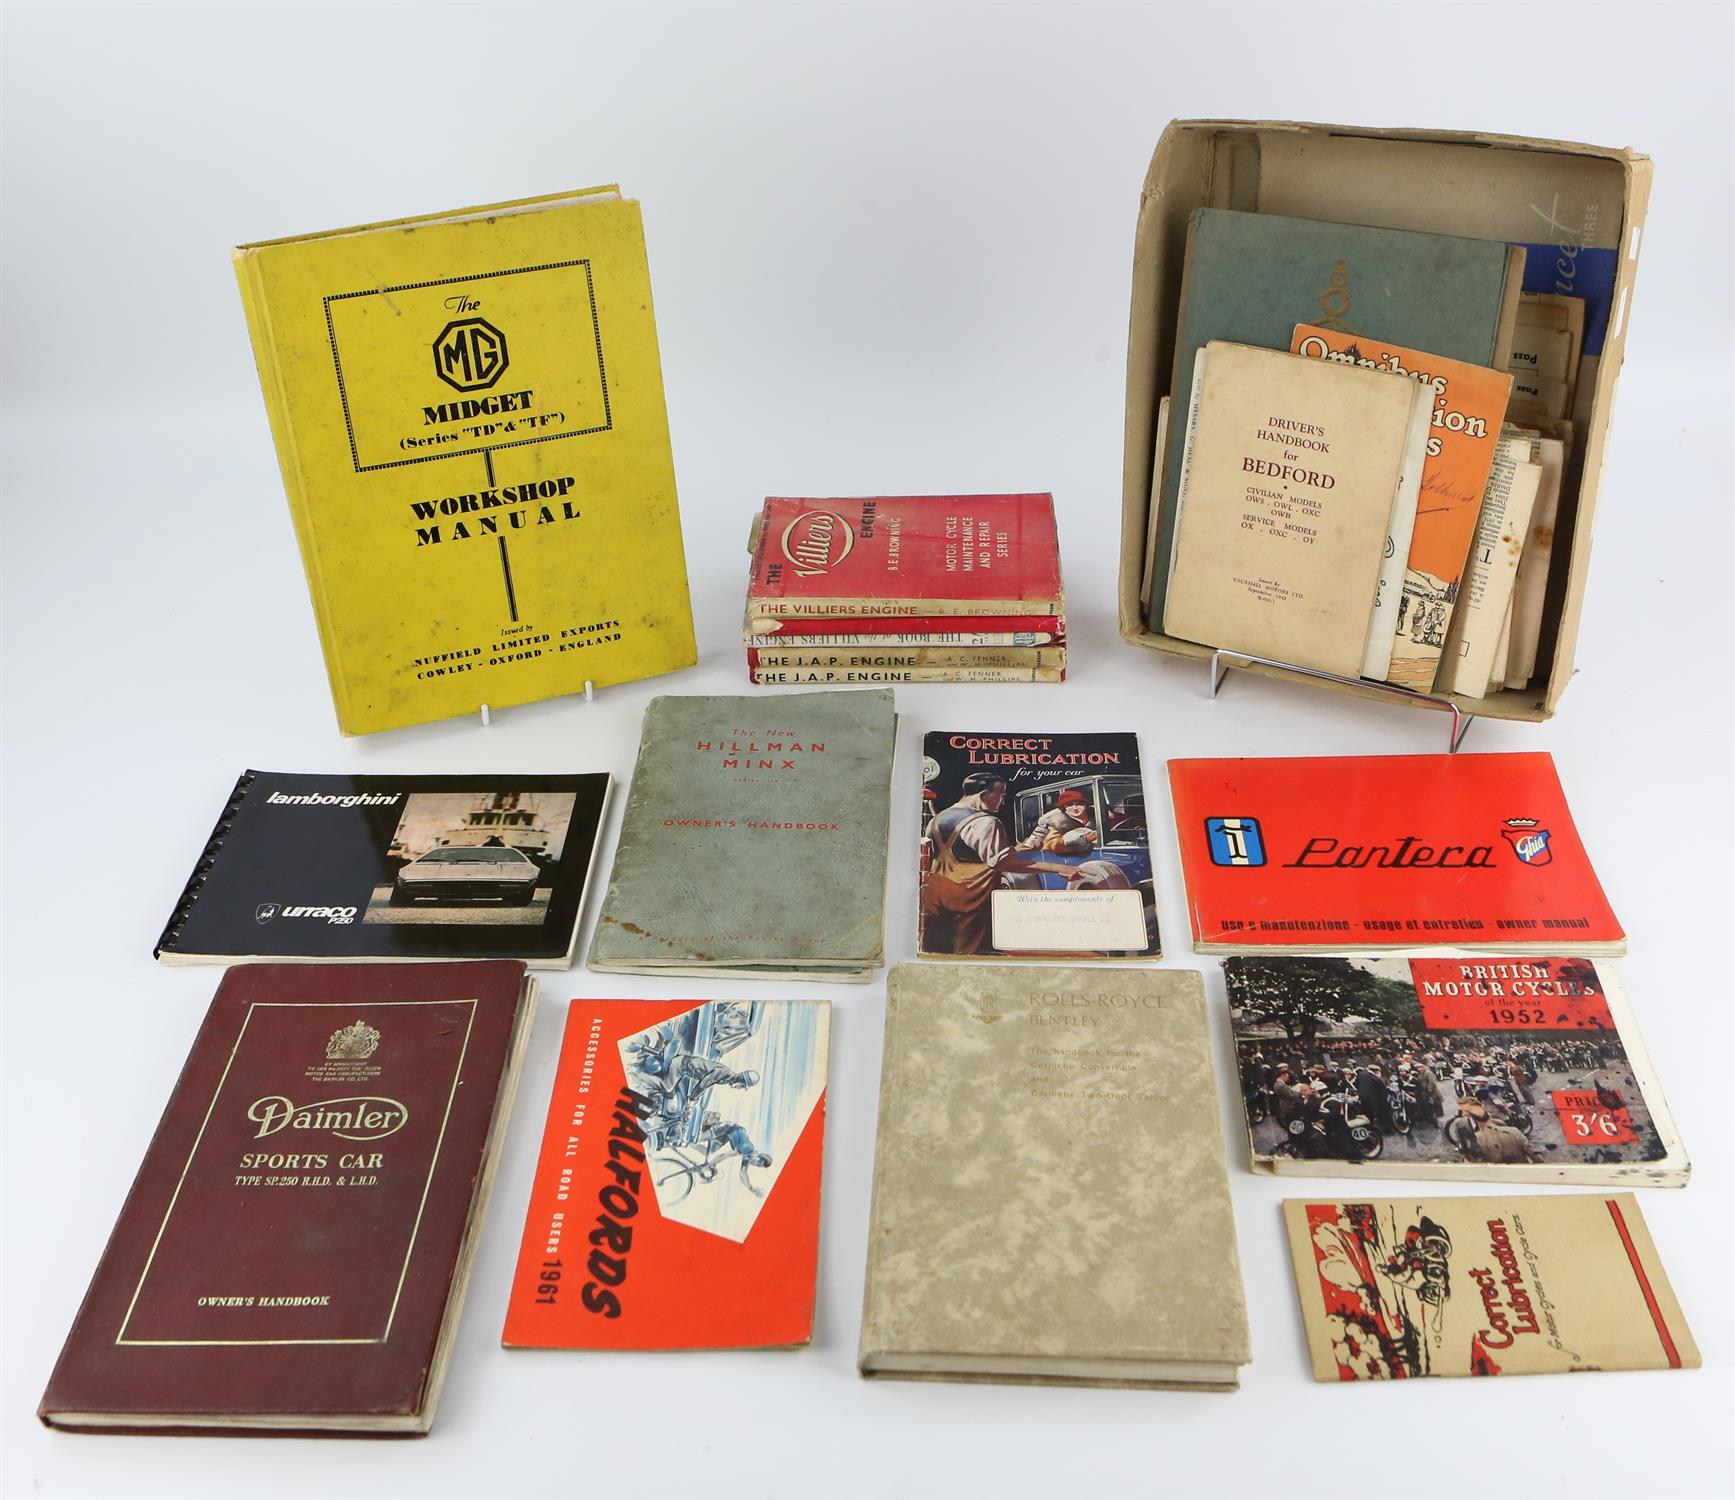 Large Collection of Vintage Car Manuals and Books - To include Rolls - Royce Bentley handbook for